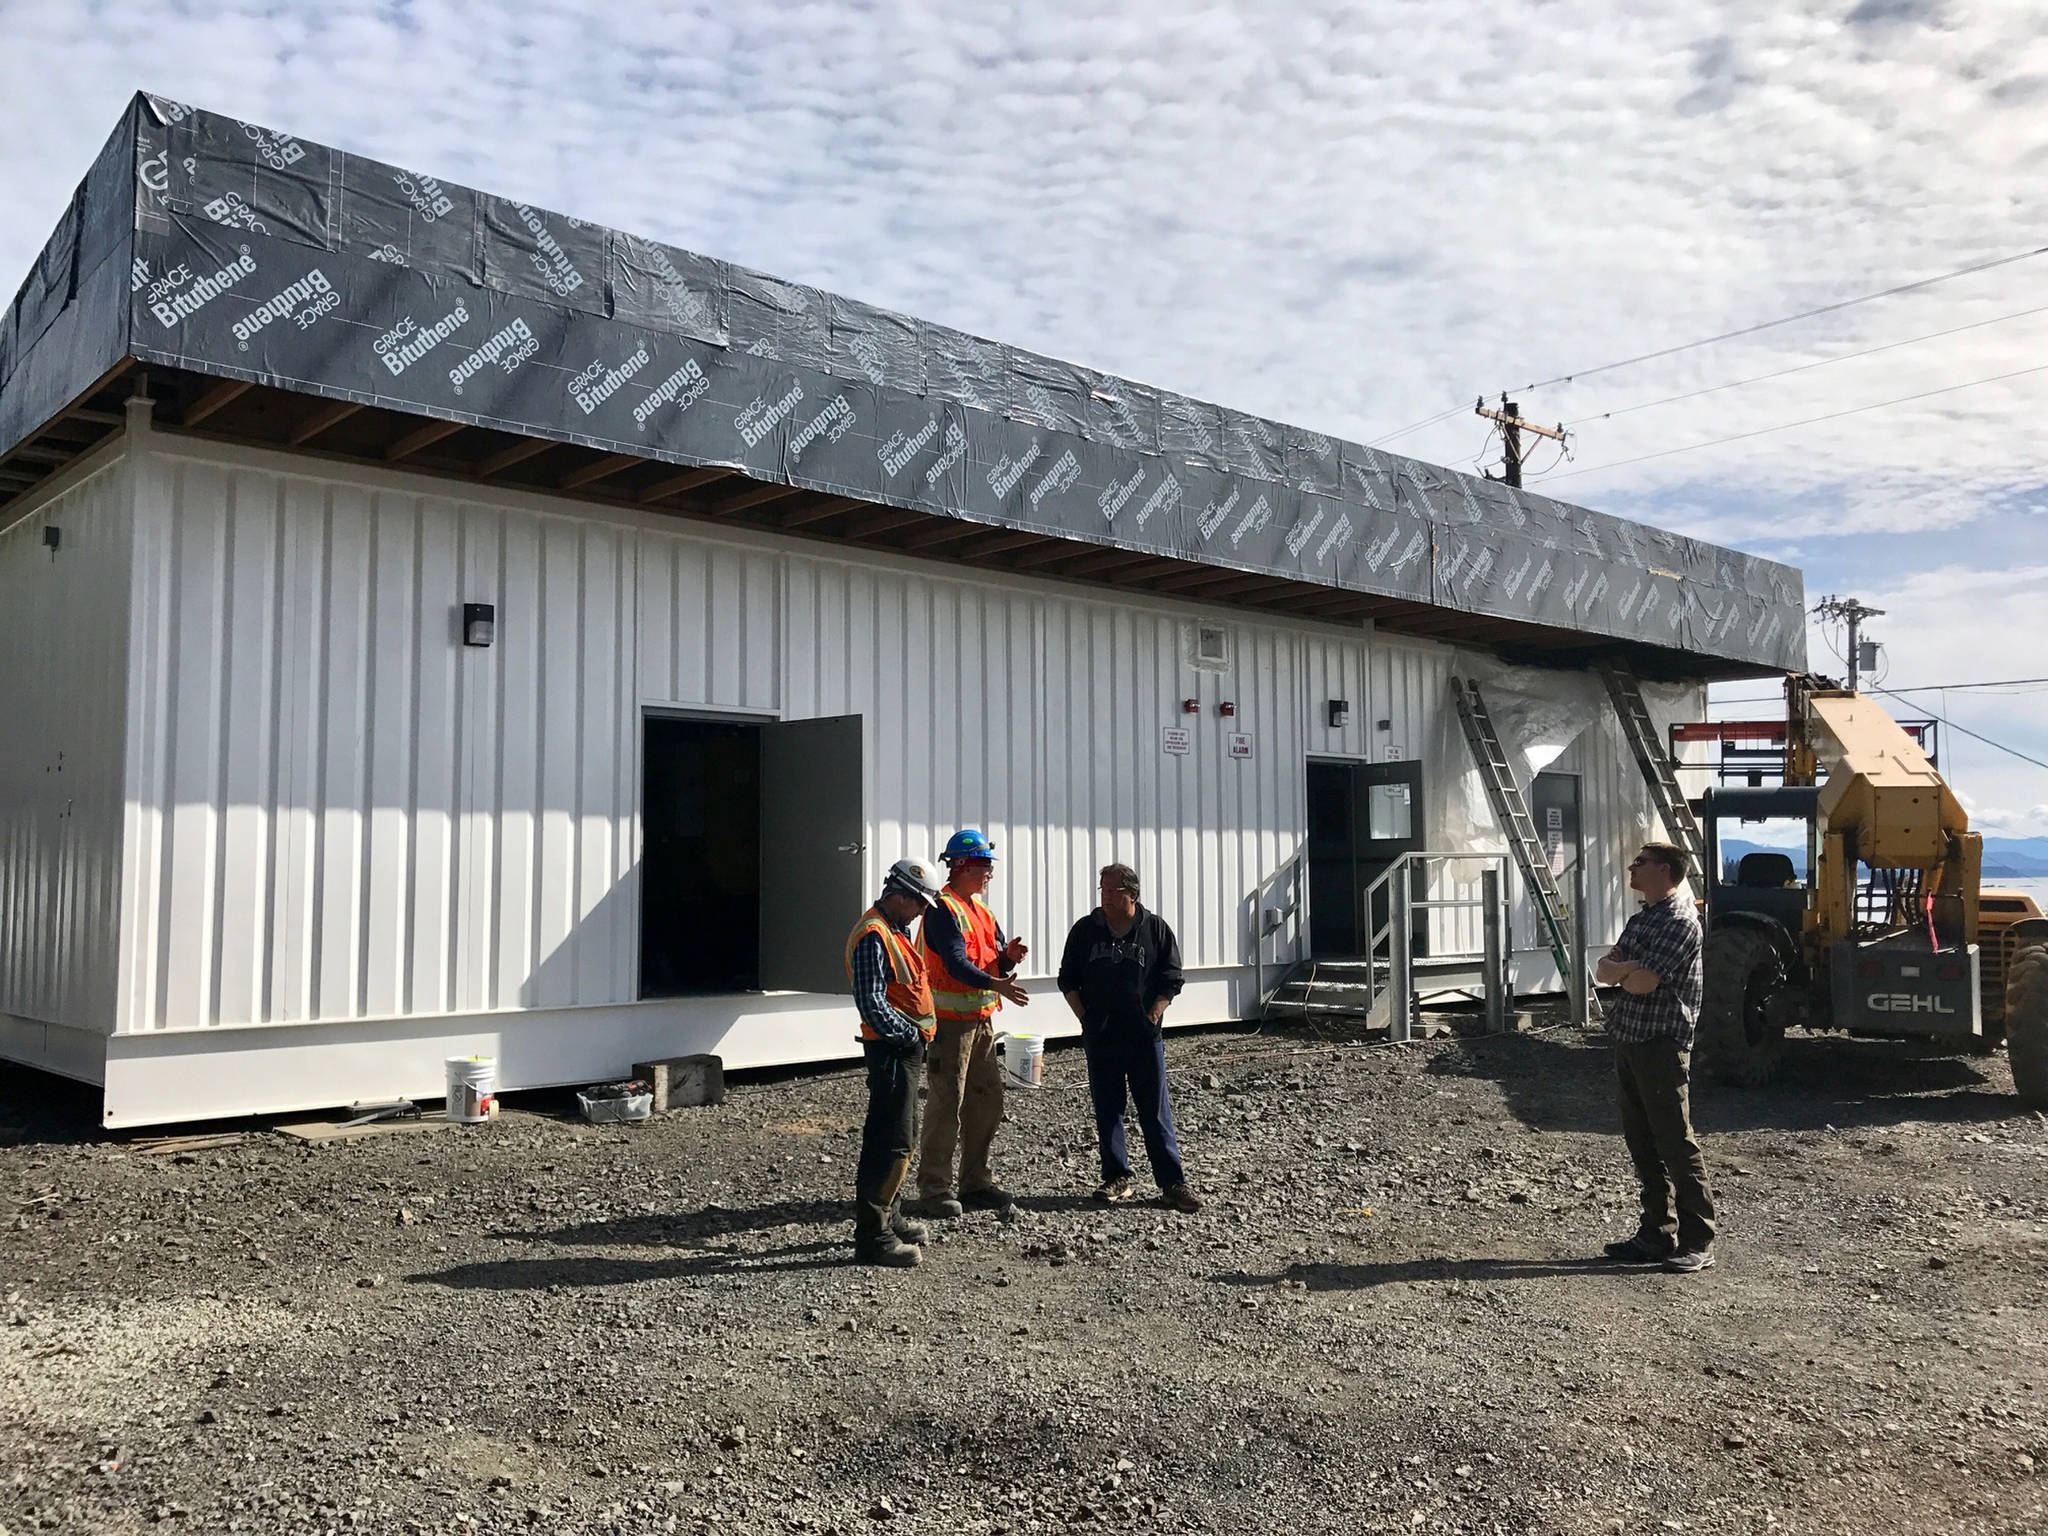 In 2017, a Rural Power System Upgrade grant from the Alaska Energy Authority paid for renovations by the Inside Passage Electric Cooperative to the diesel powerhouse in Kake, seen here in a photograph provided by IPEC CEO Jodi Mitchell. The AEA is considering changes to the program, with major implications for rural electric customers. (Courtesy photo)